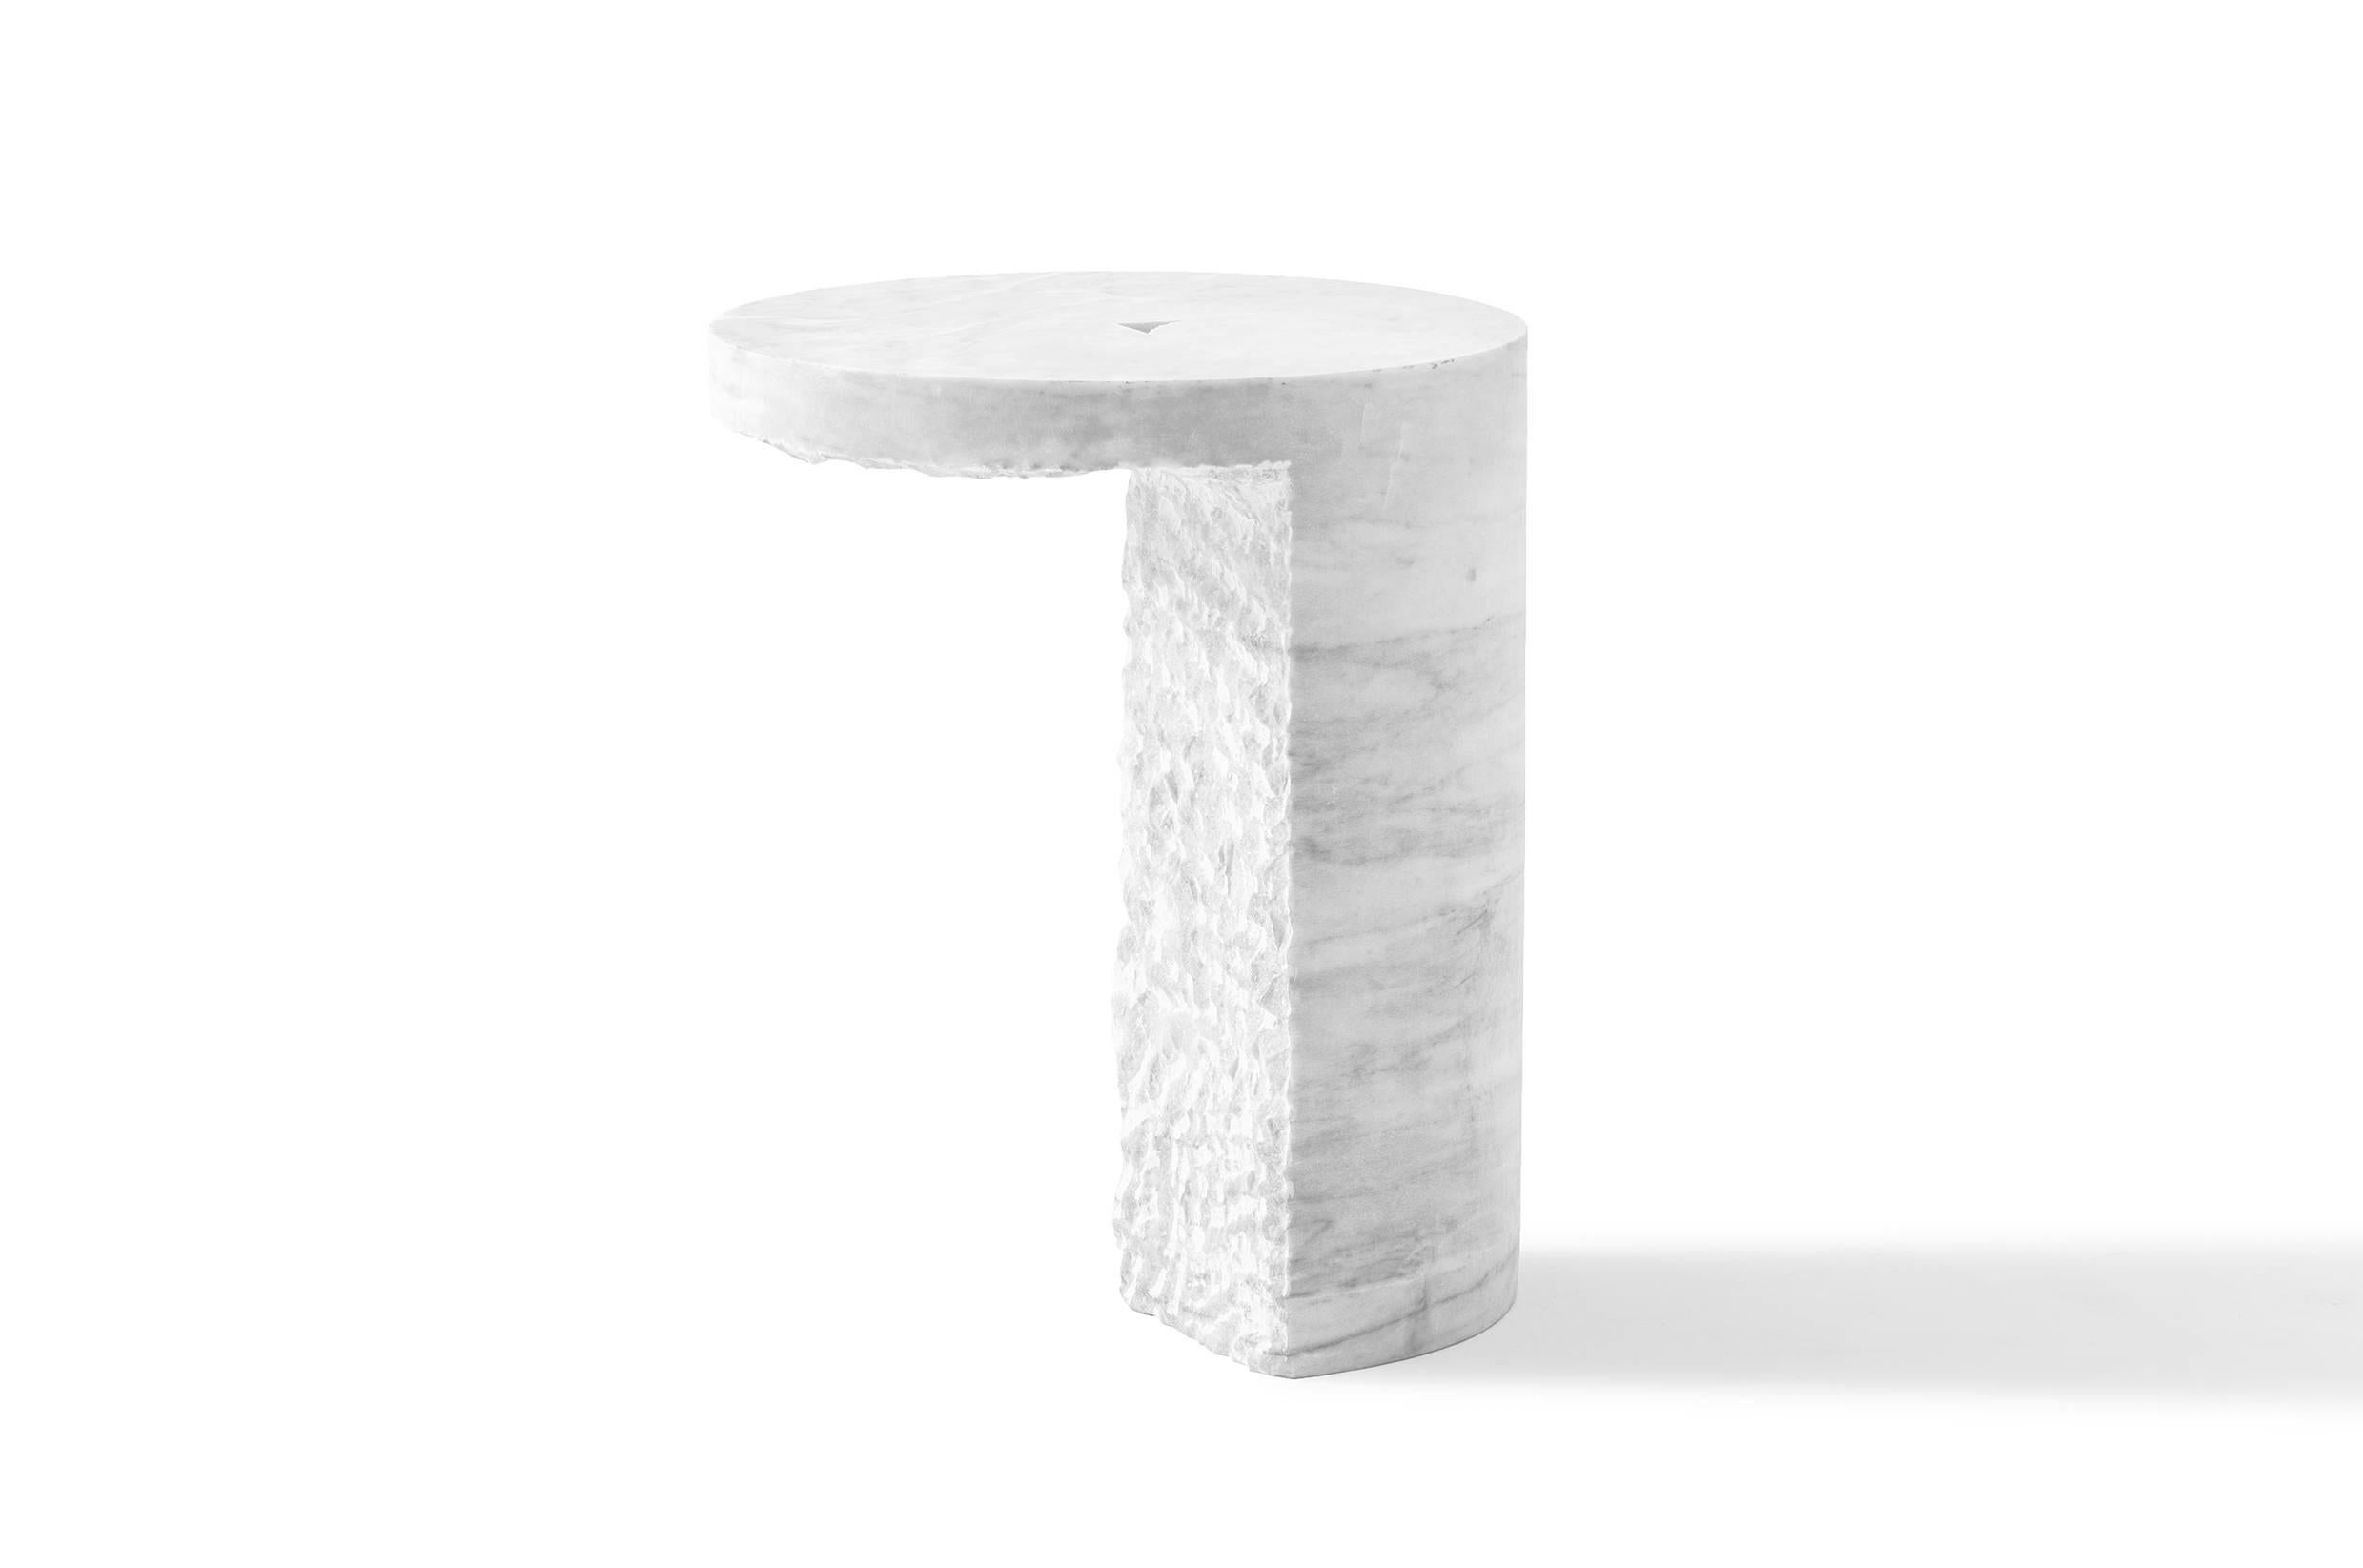 The altar side table is part of the Sacred Ritual Objects is the first collection by EWE Studio. S.R.O. was created out of fascination by the evolving skill of the artisans and their successful execution of exquisite objects, designed to ignite a